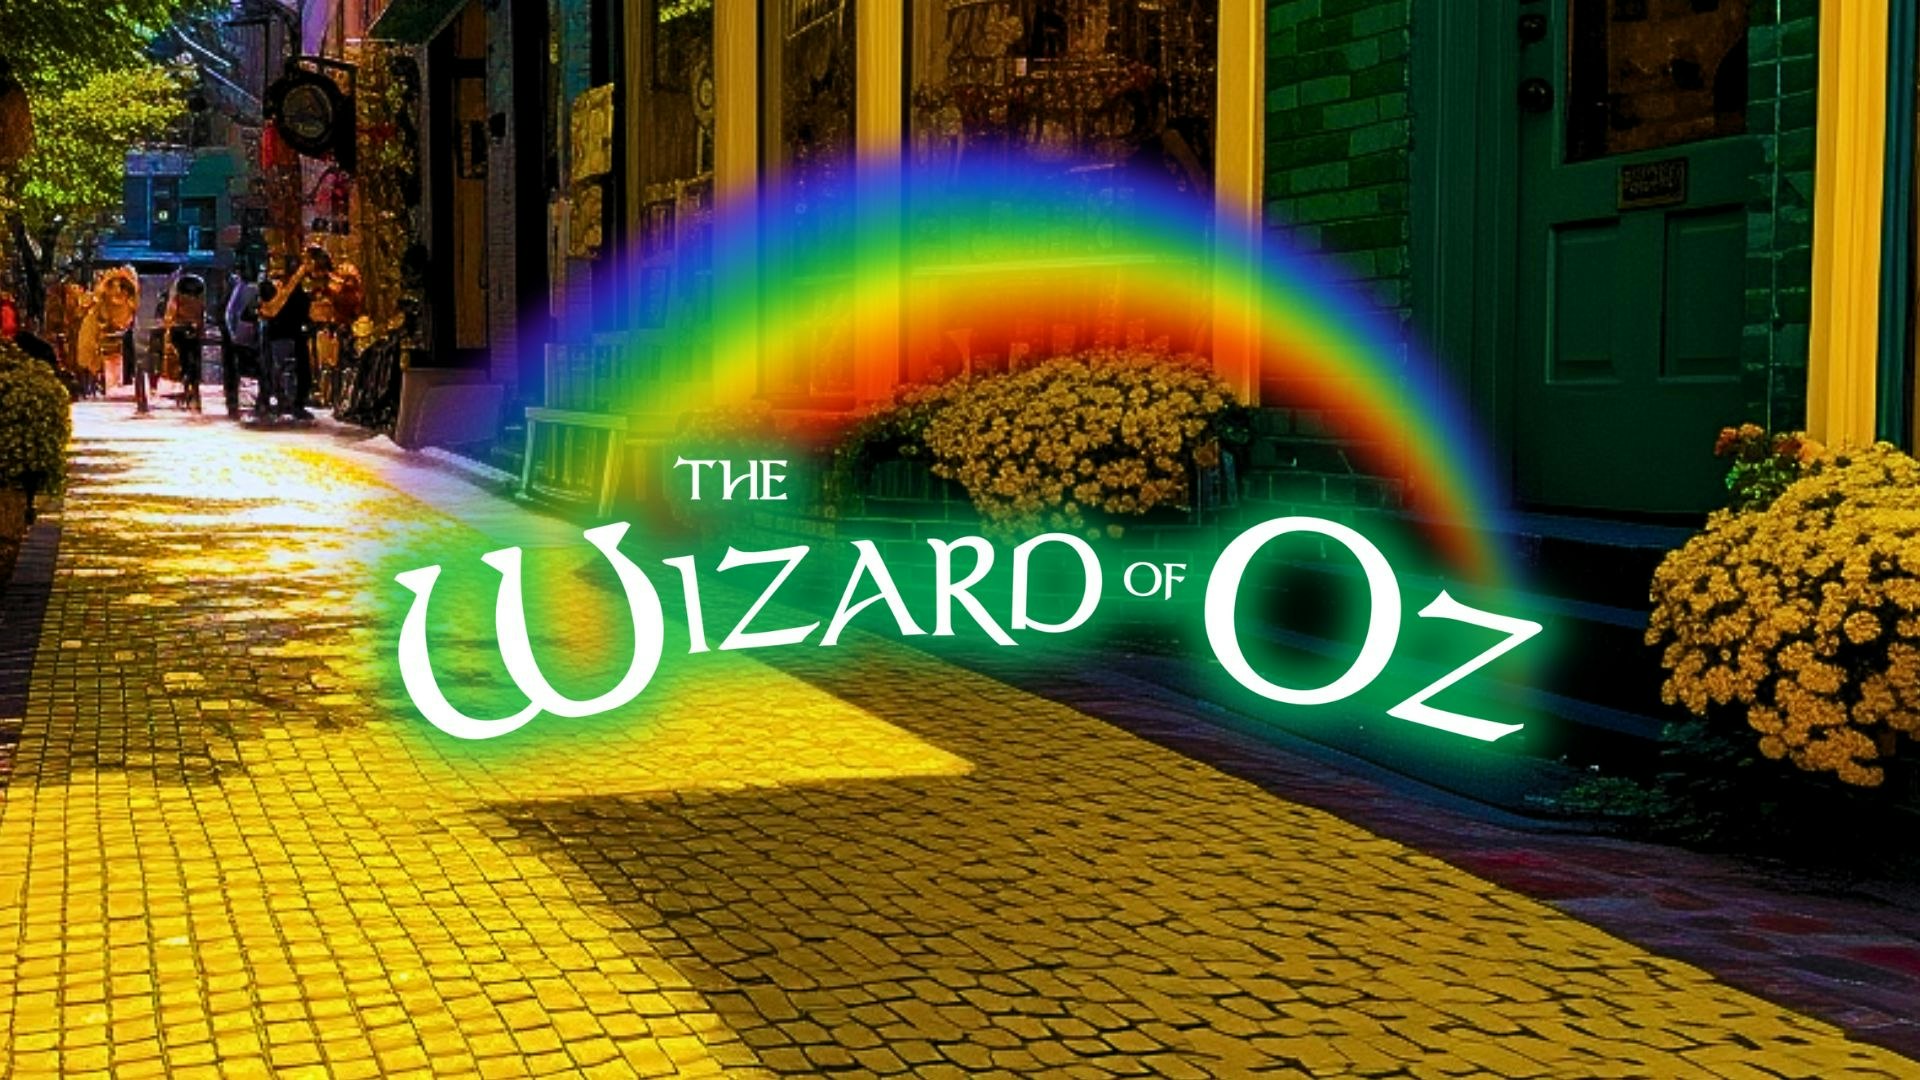 The Wizard of Oz Experience in Seattle